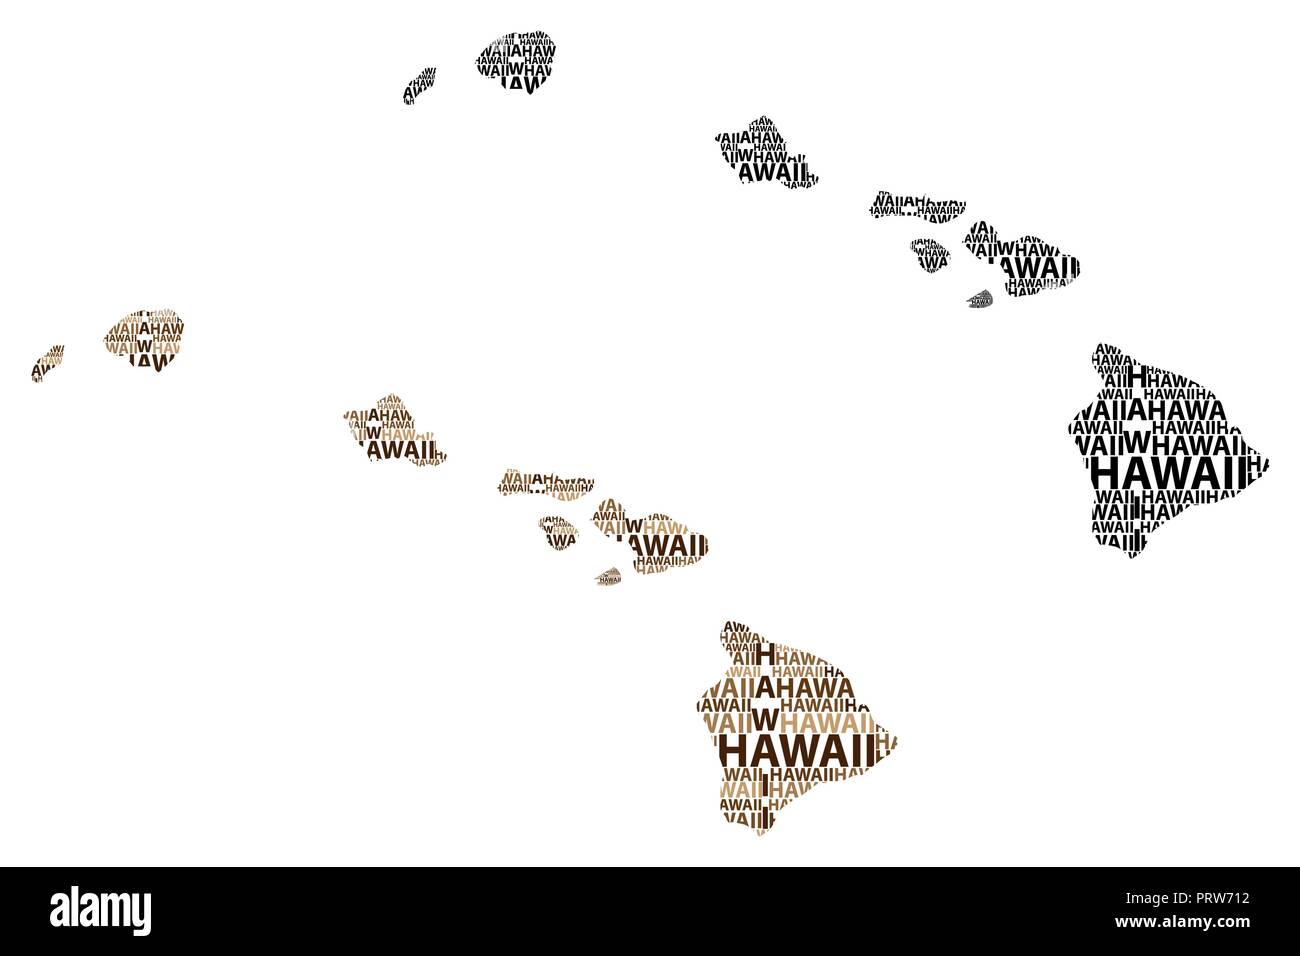 Sketch Hawaii (United States of America) letter text map, Hawaii map - in the shape of the continent, Map State of Hawaii - brown and black vector ill Stock Vector